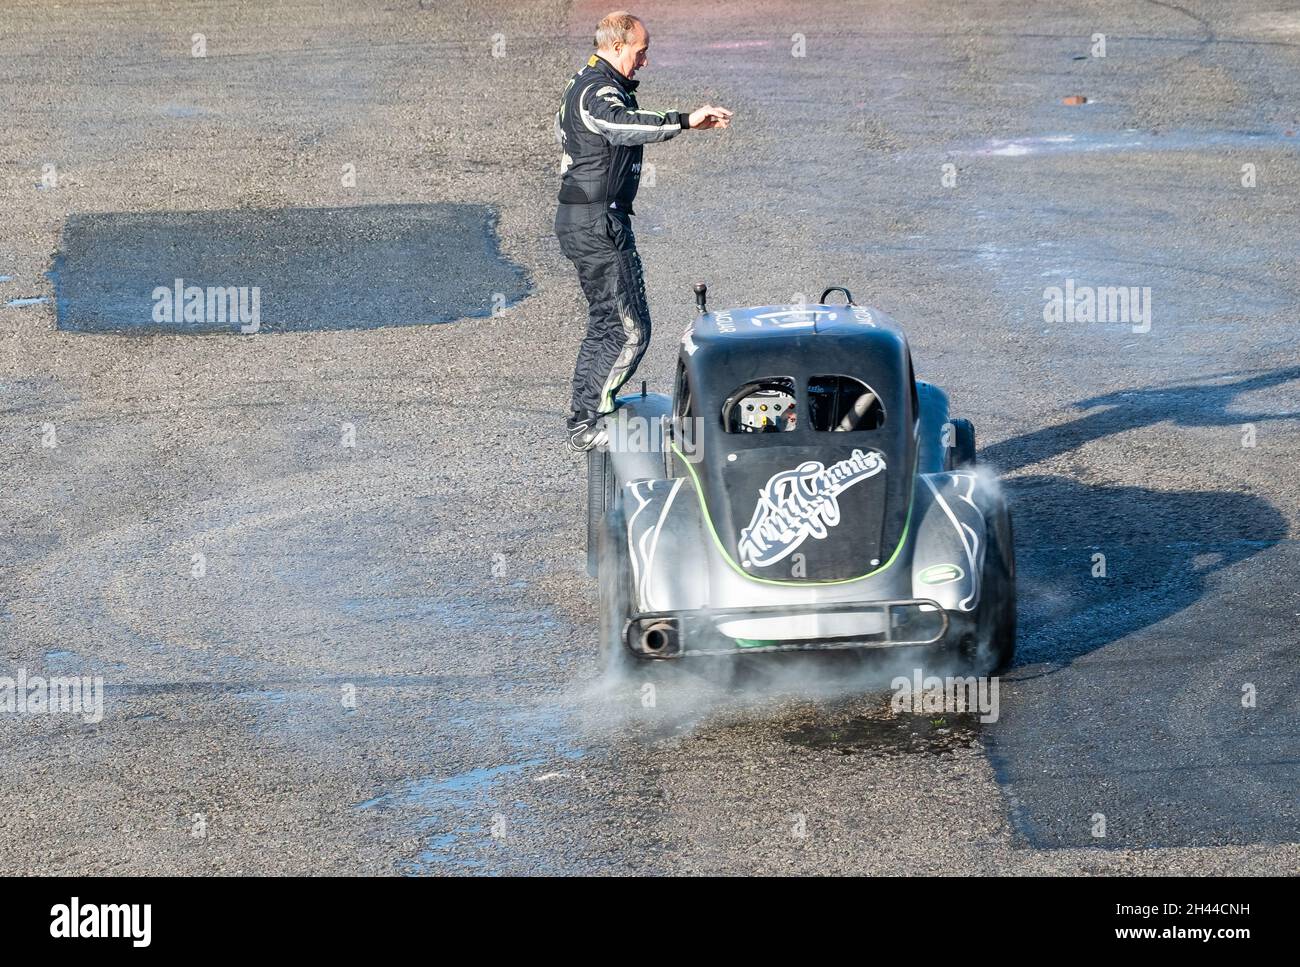 The World famous stunt driver Terry Grant putting on a dangerous stunt show at the Flame & Thunder event at Santa Pod race way, October 2021 Stock Photo